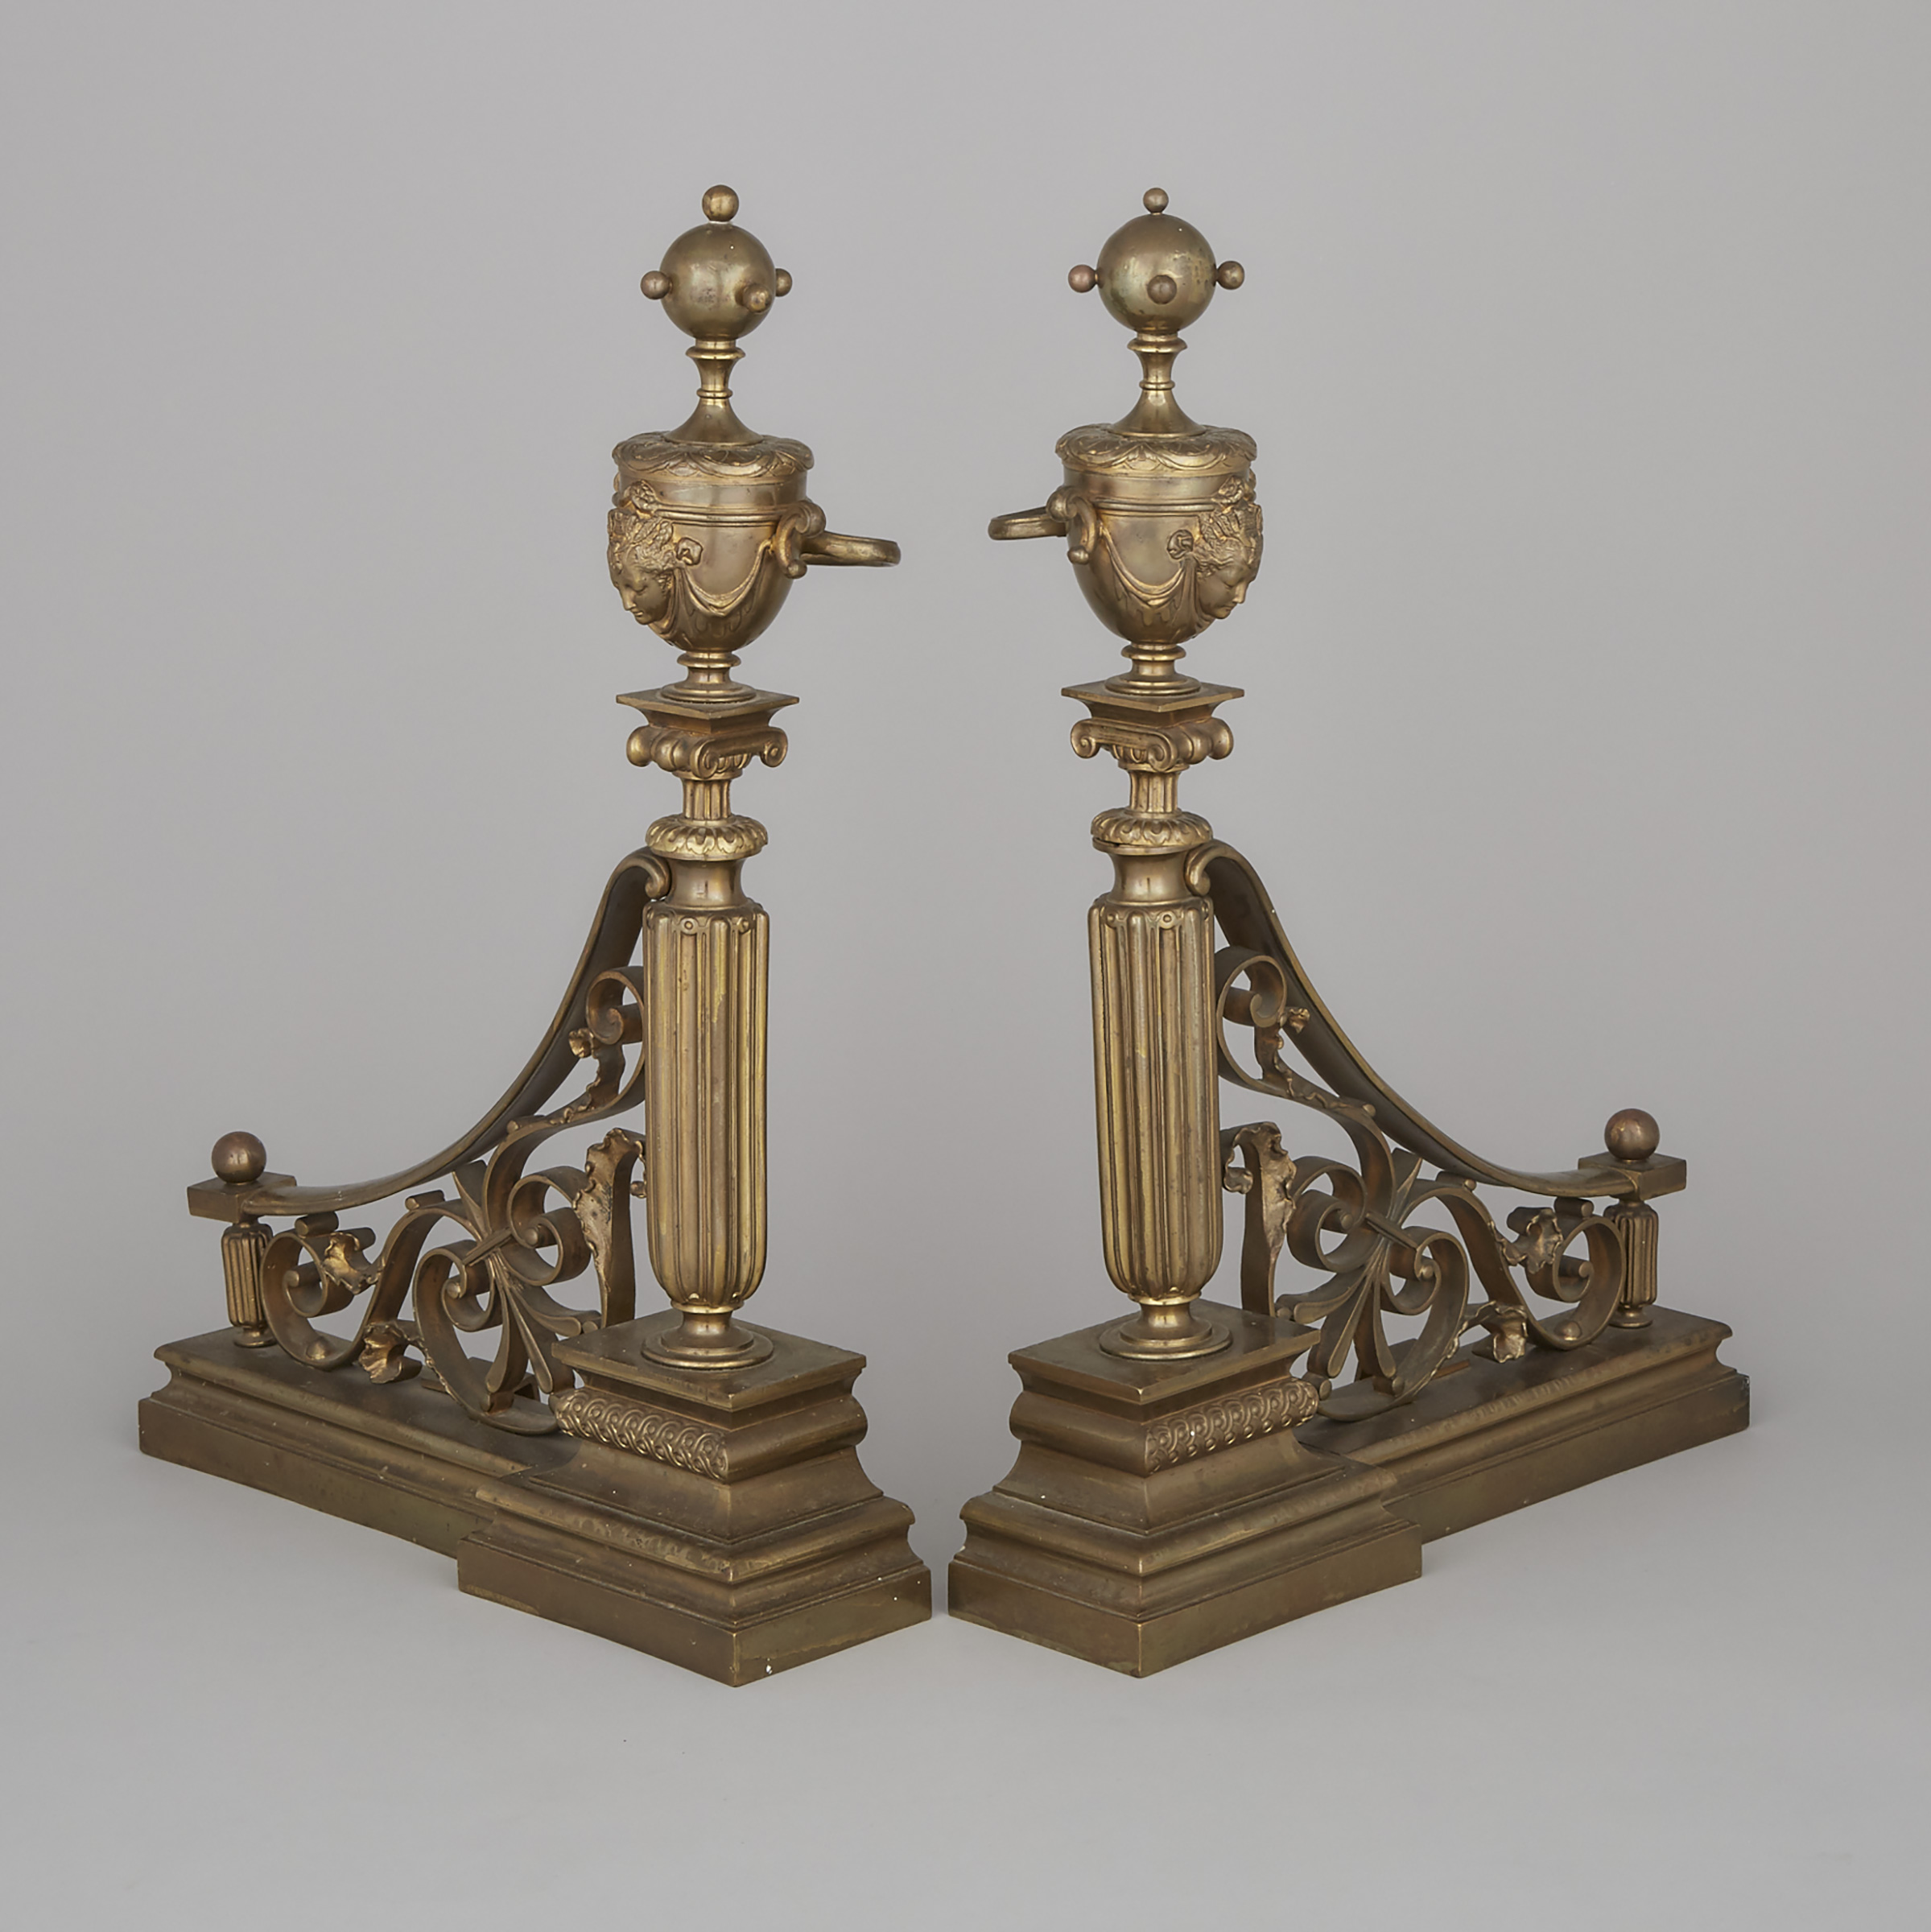 Pair of French Neoclasical Brass Andirons, 19th century